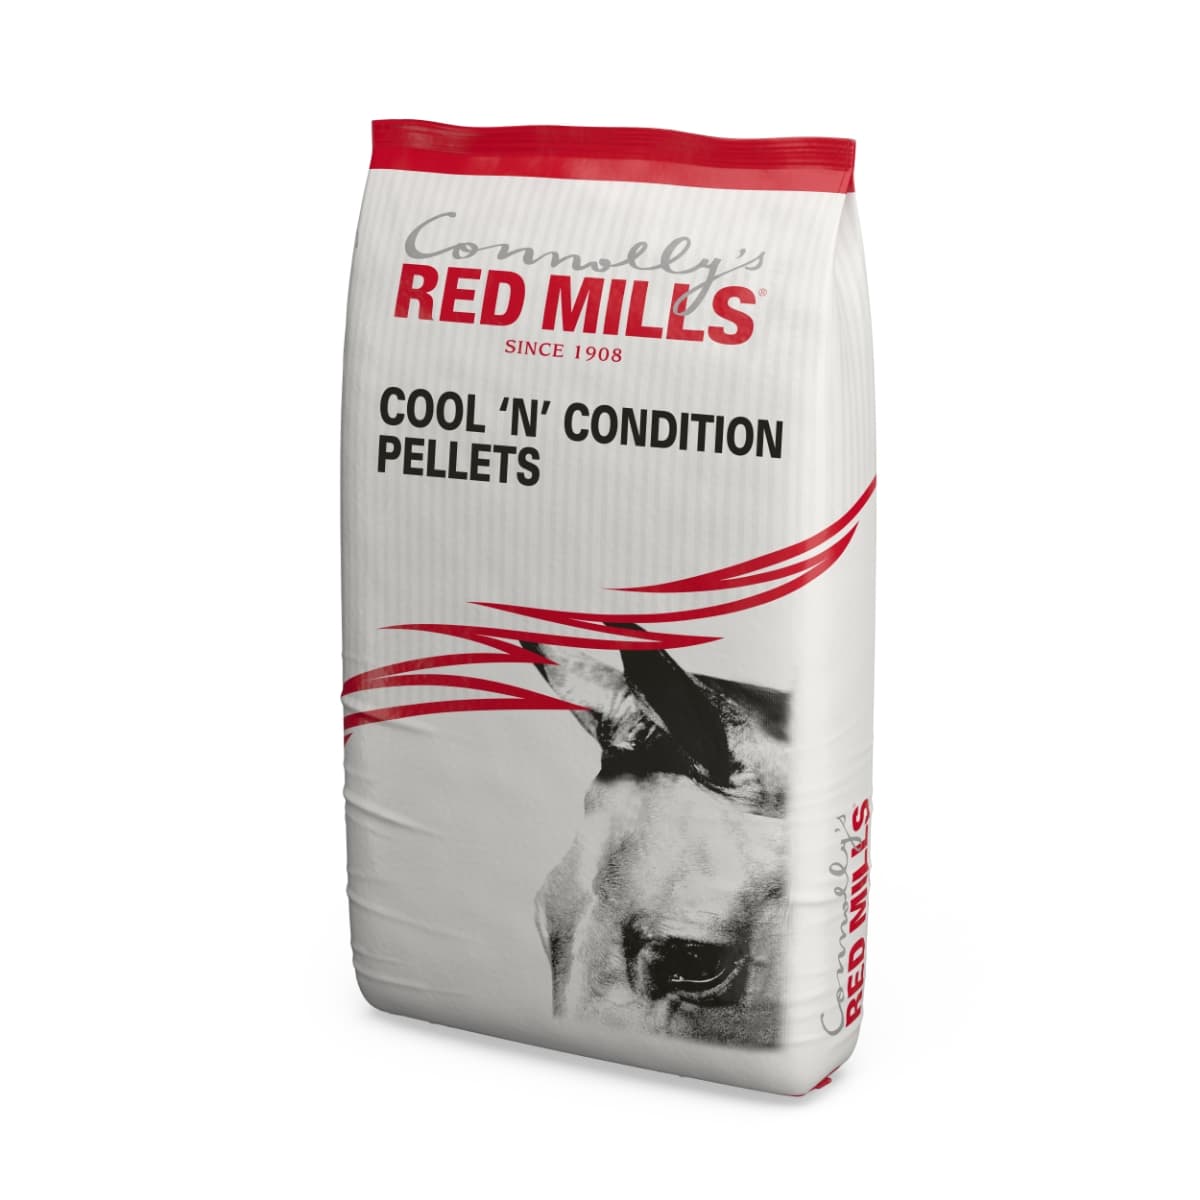 RED MILLS Cool N Conditioning Pellets